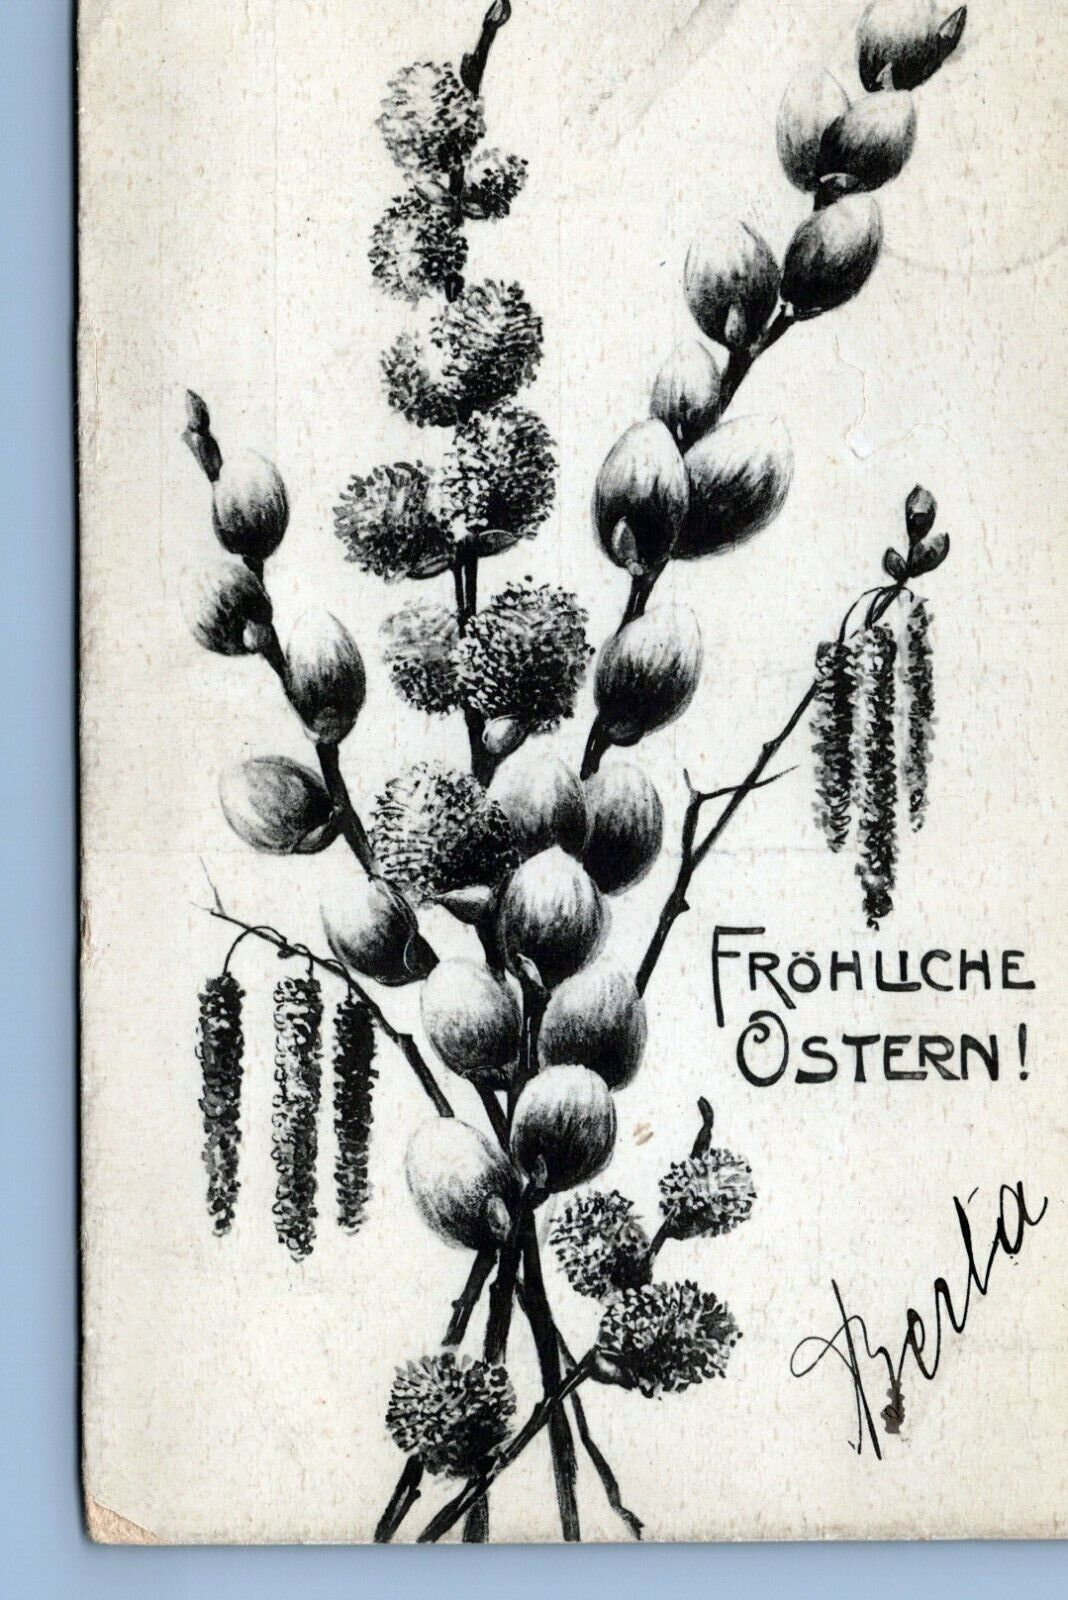 Frohliche Ostern - Happy Easter. Posted in 1905 German Postcard